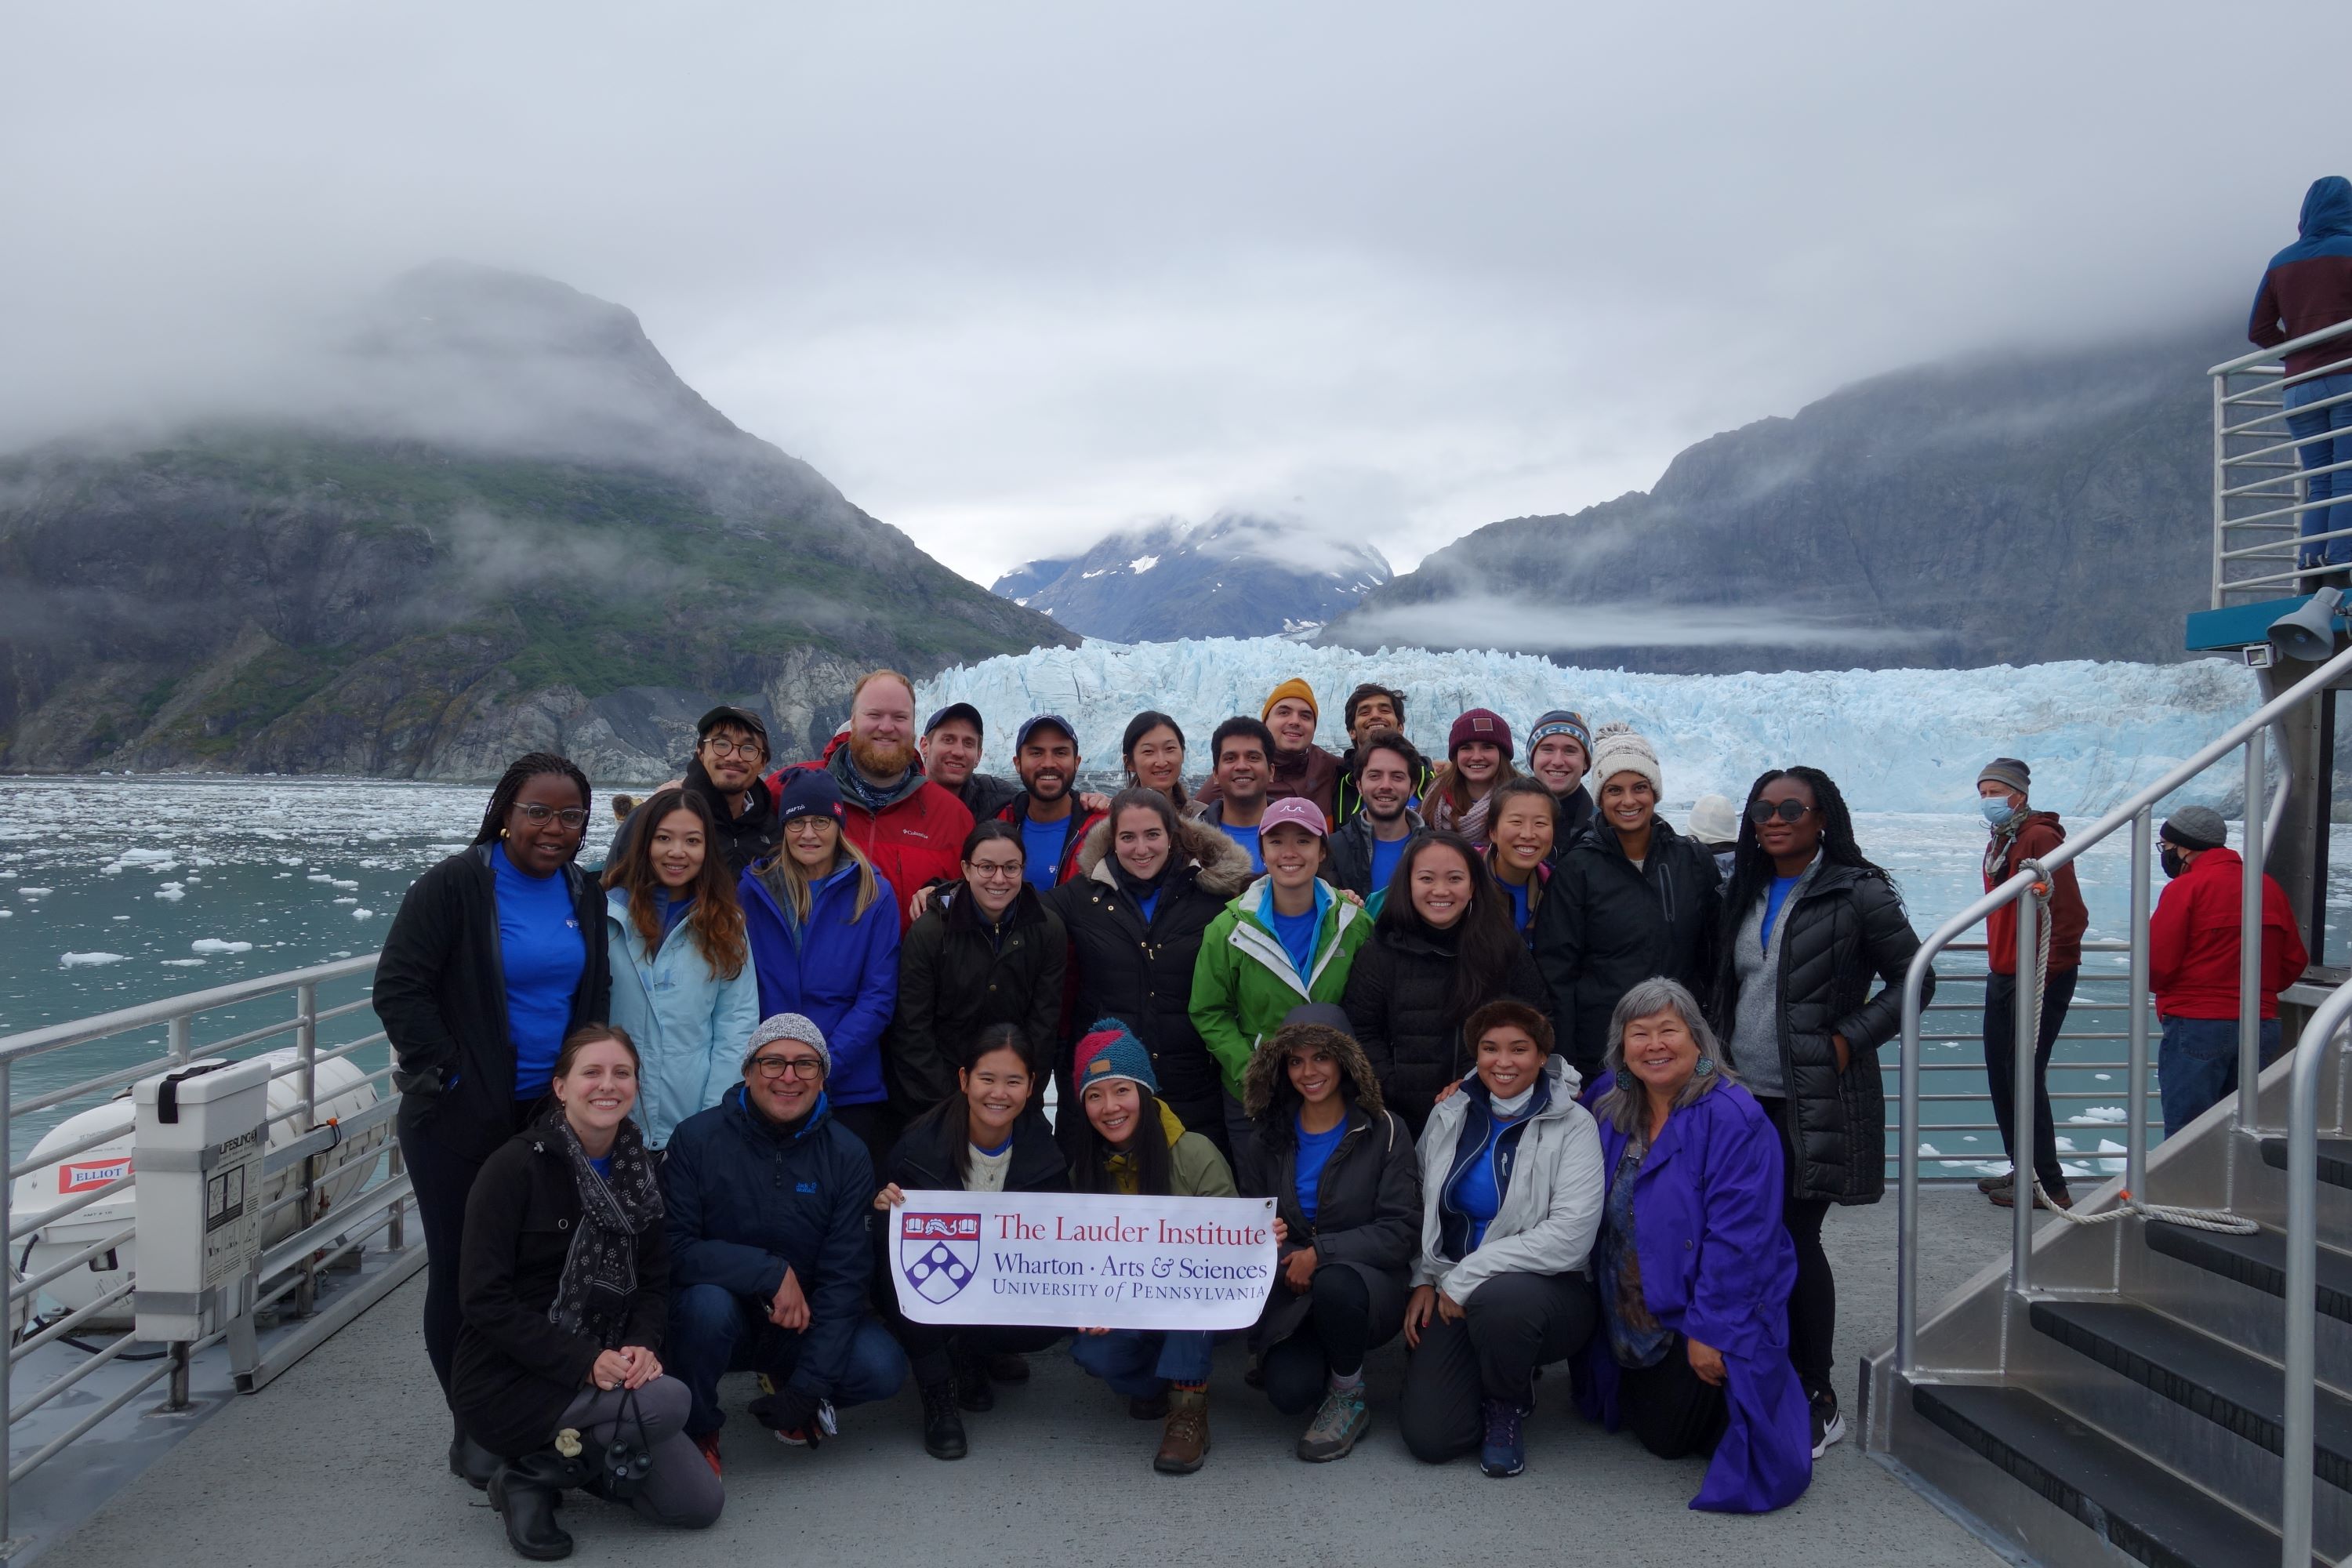 Lauder students posing on a ship in front of a glacier